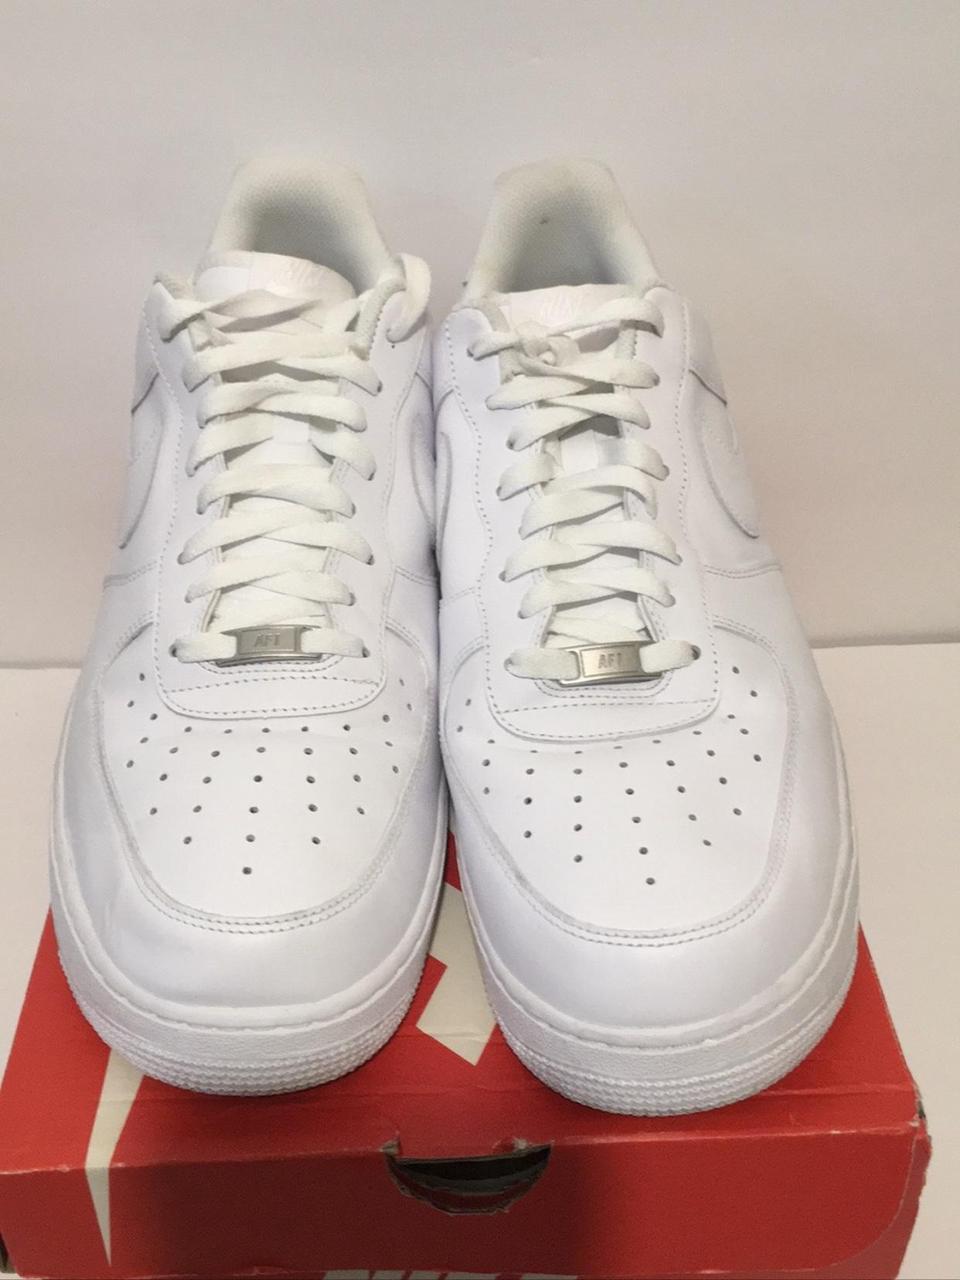 Nike Air Force ones size 11 - Depop